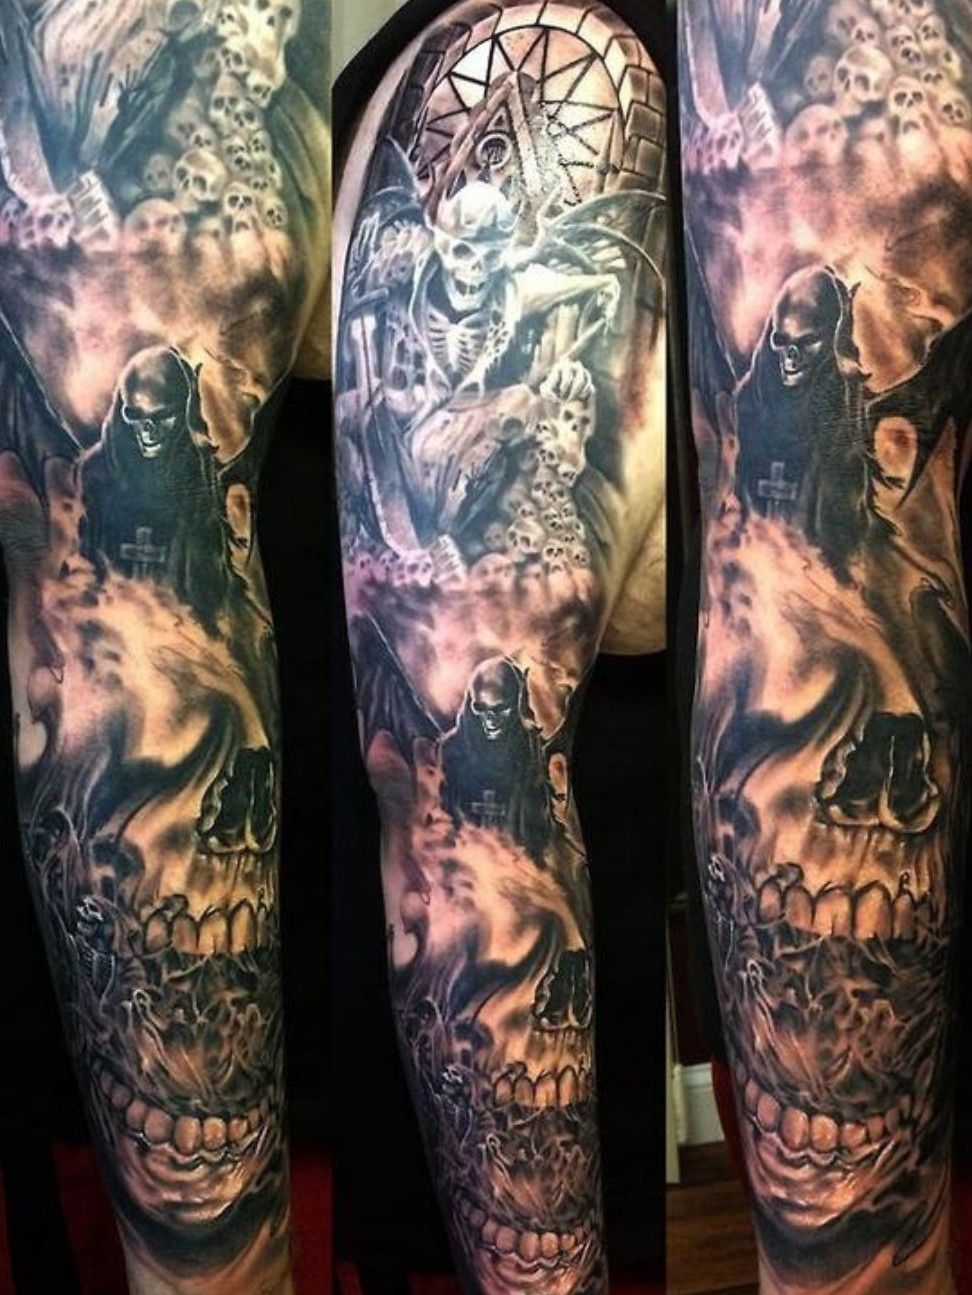 Tattoo uploaded by s7n7ster • A7X AVENGED SEVENFOLD☻❤ • Tattoodo